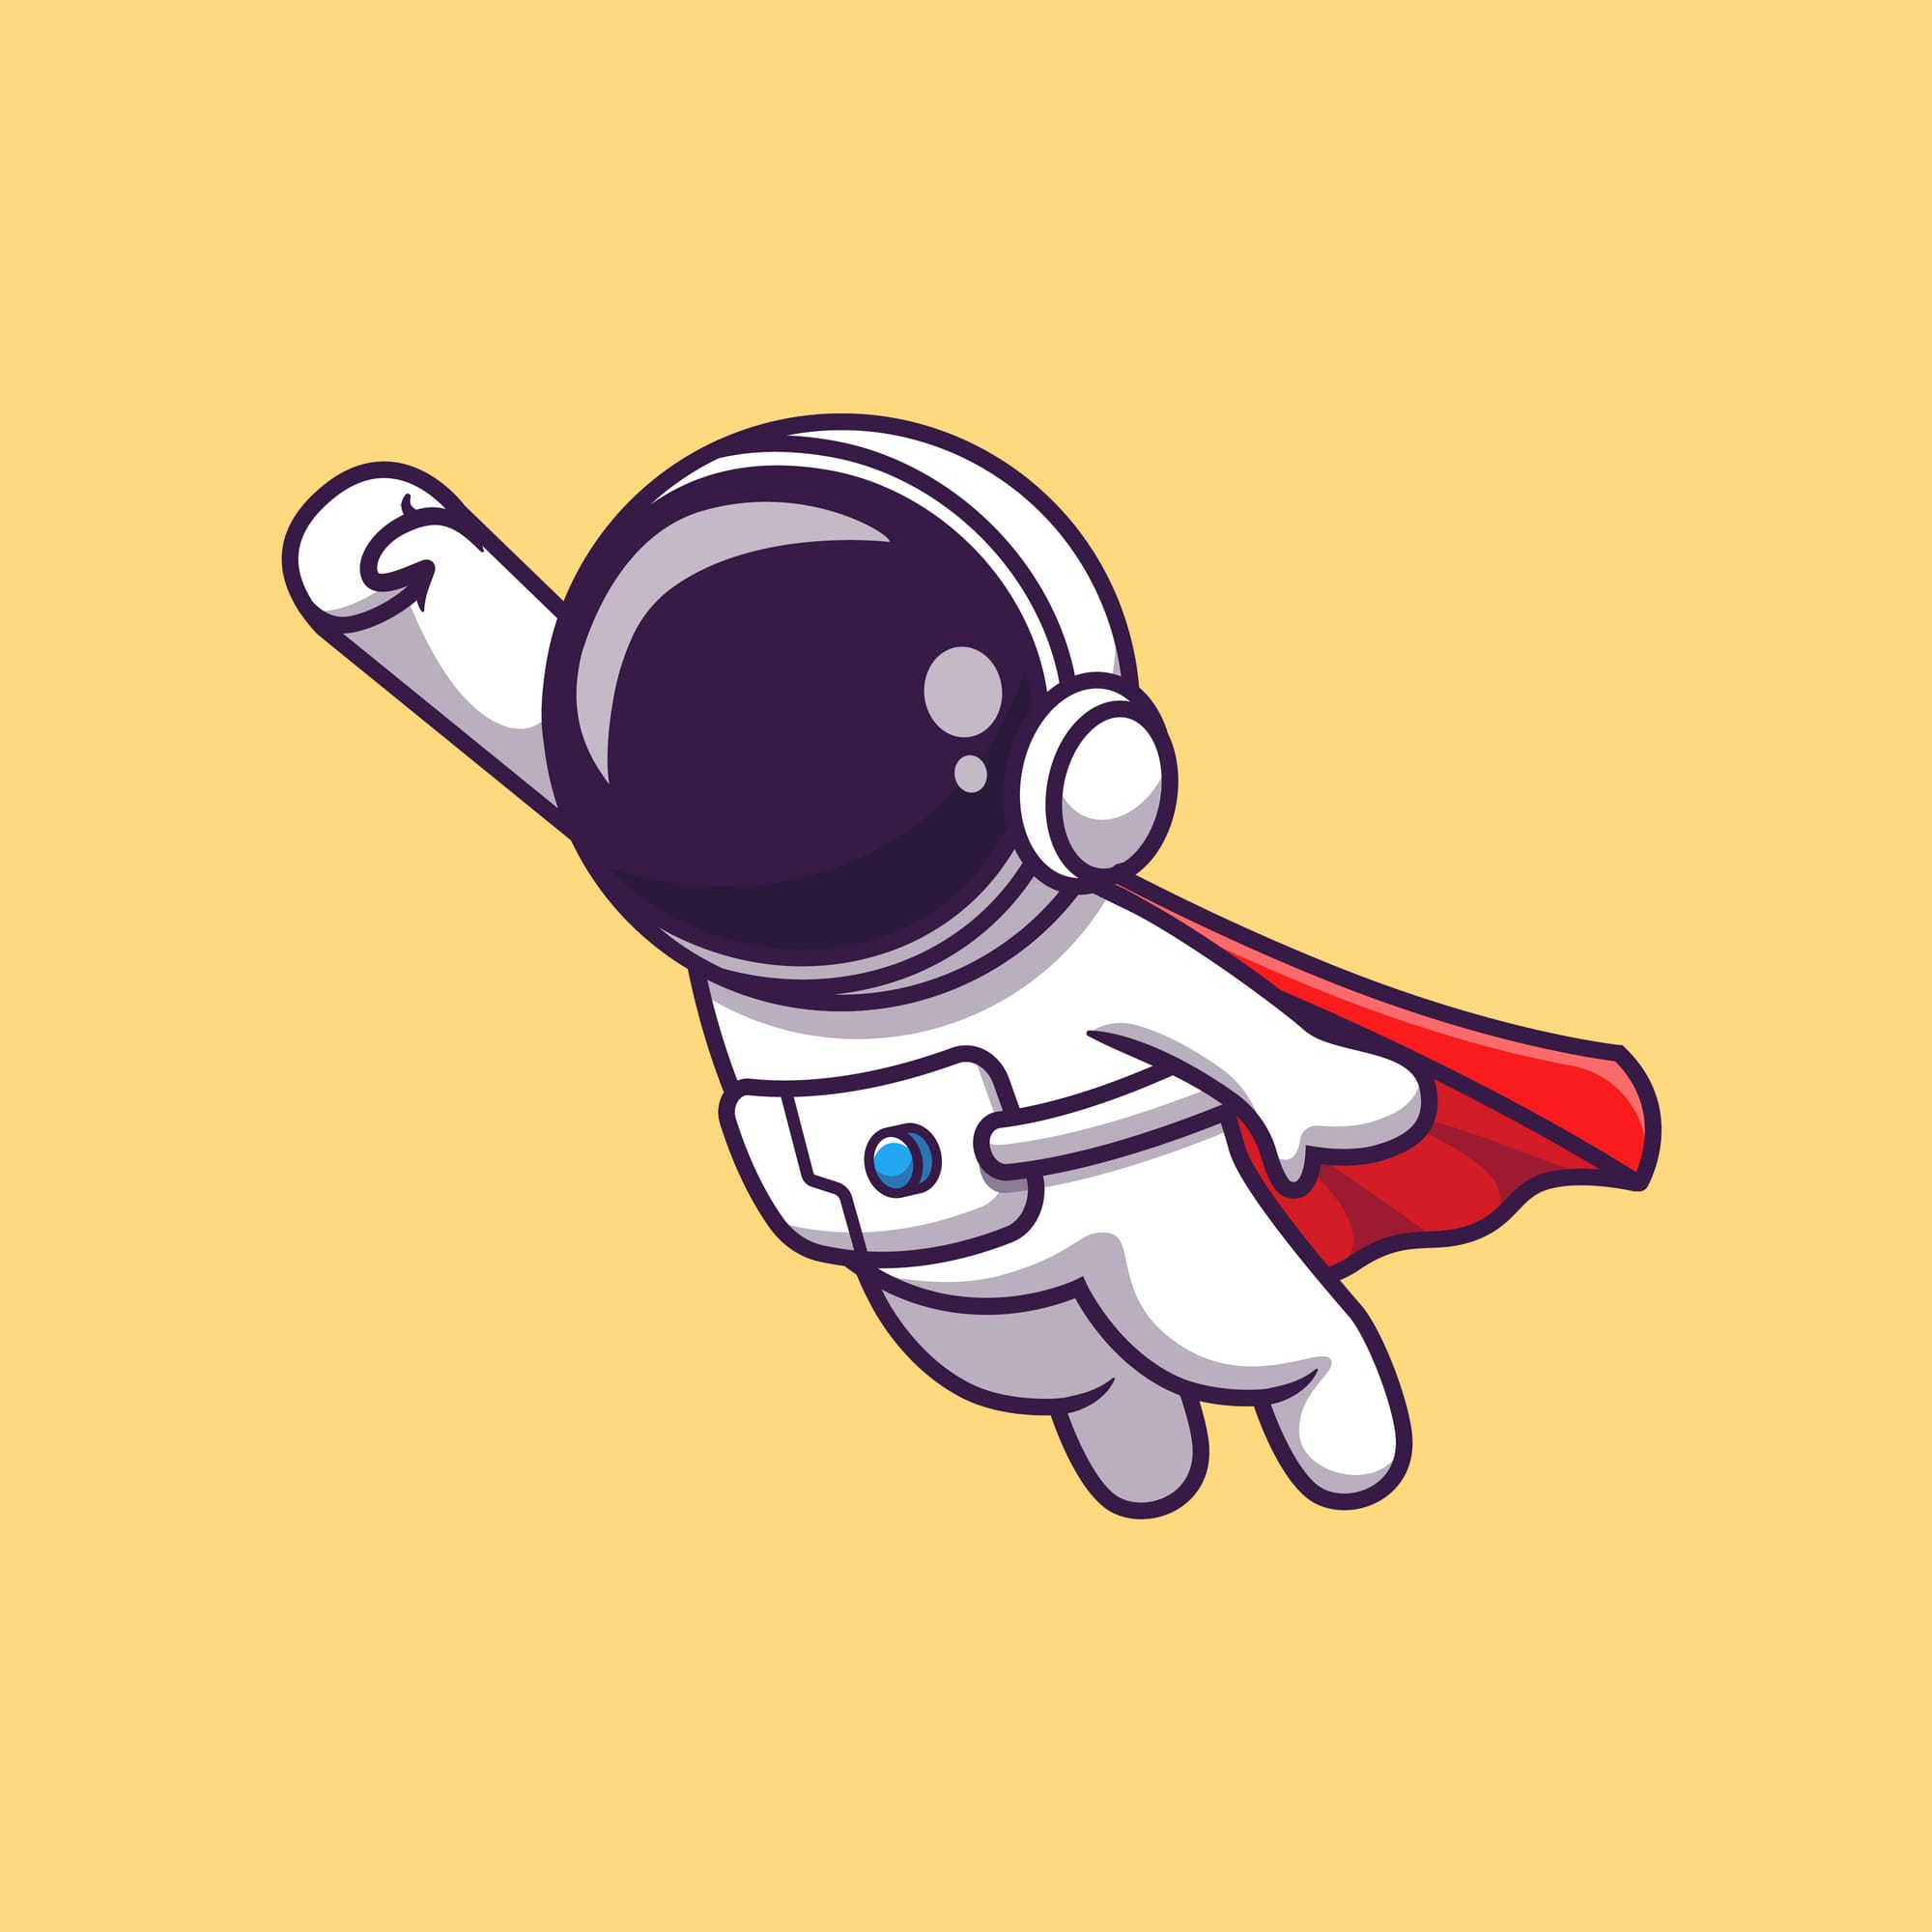 Cartoon astronaut flying in a superman pose, much like how I finished this race.